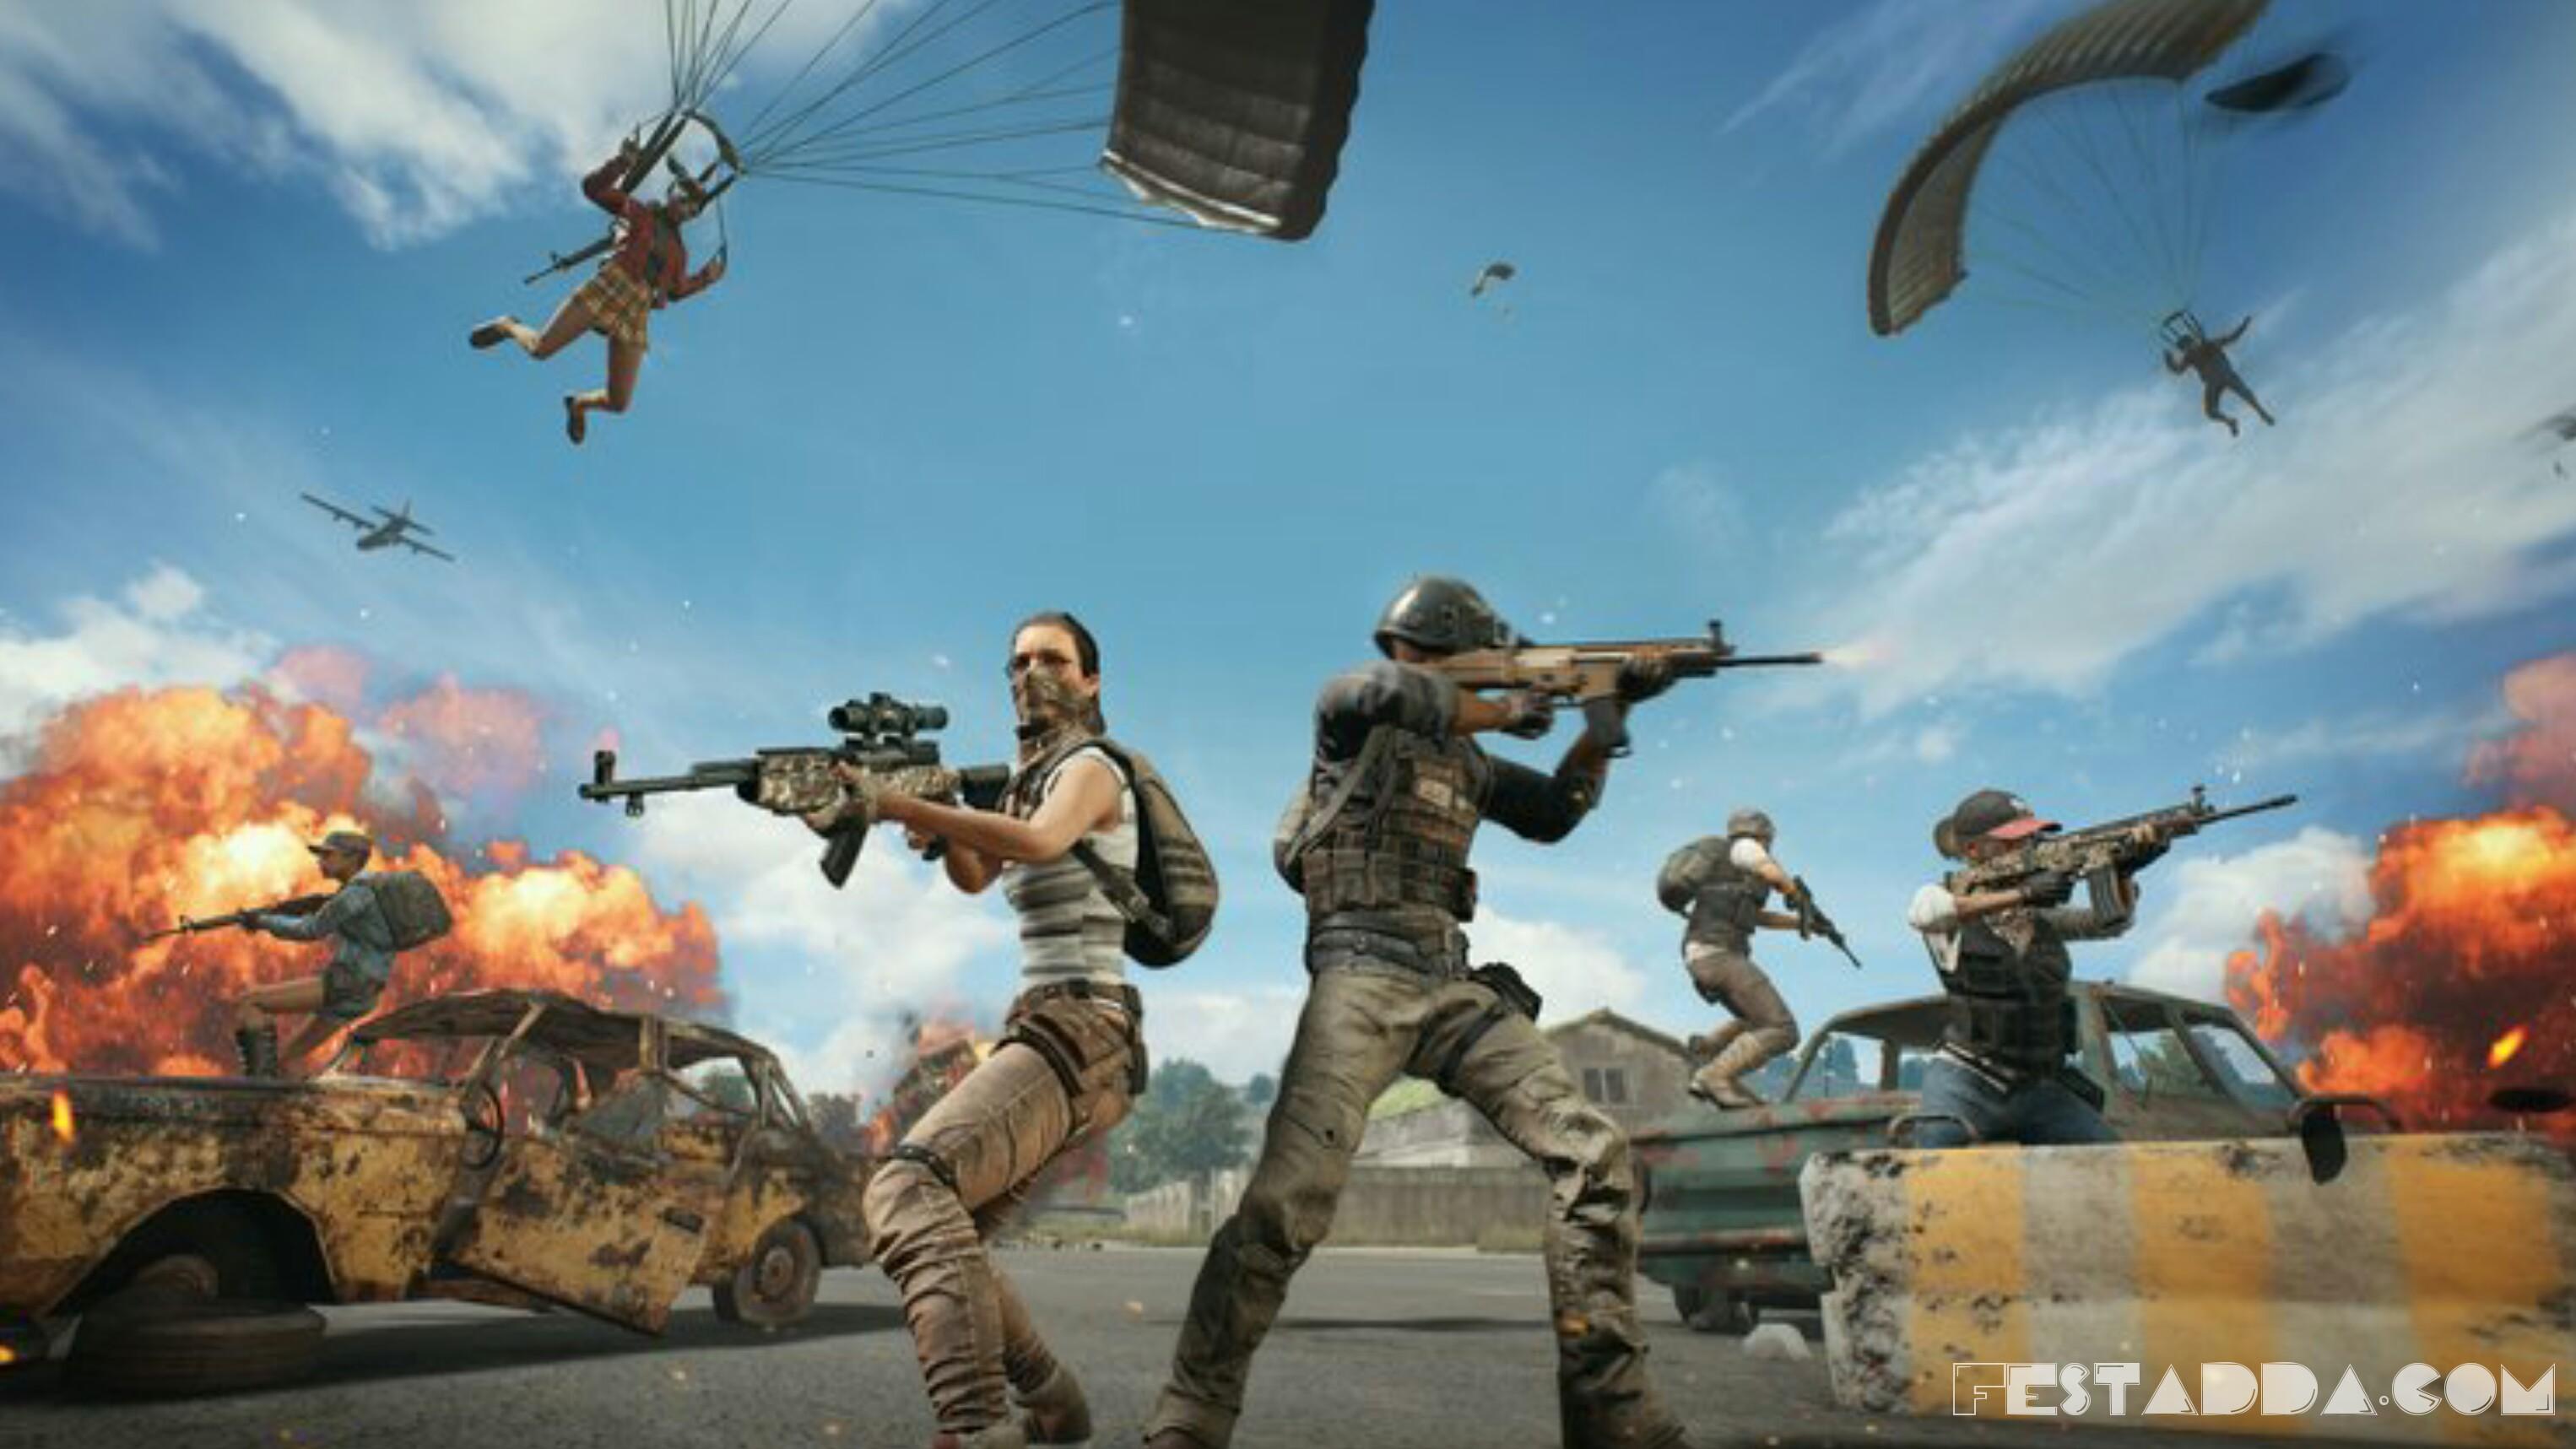 Pubg Wallpapers 4K HD 1920x1080 Image Download For Mobile